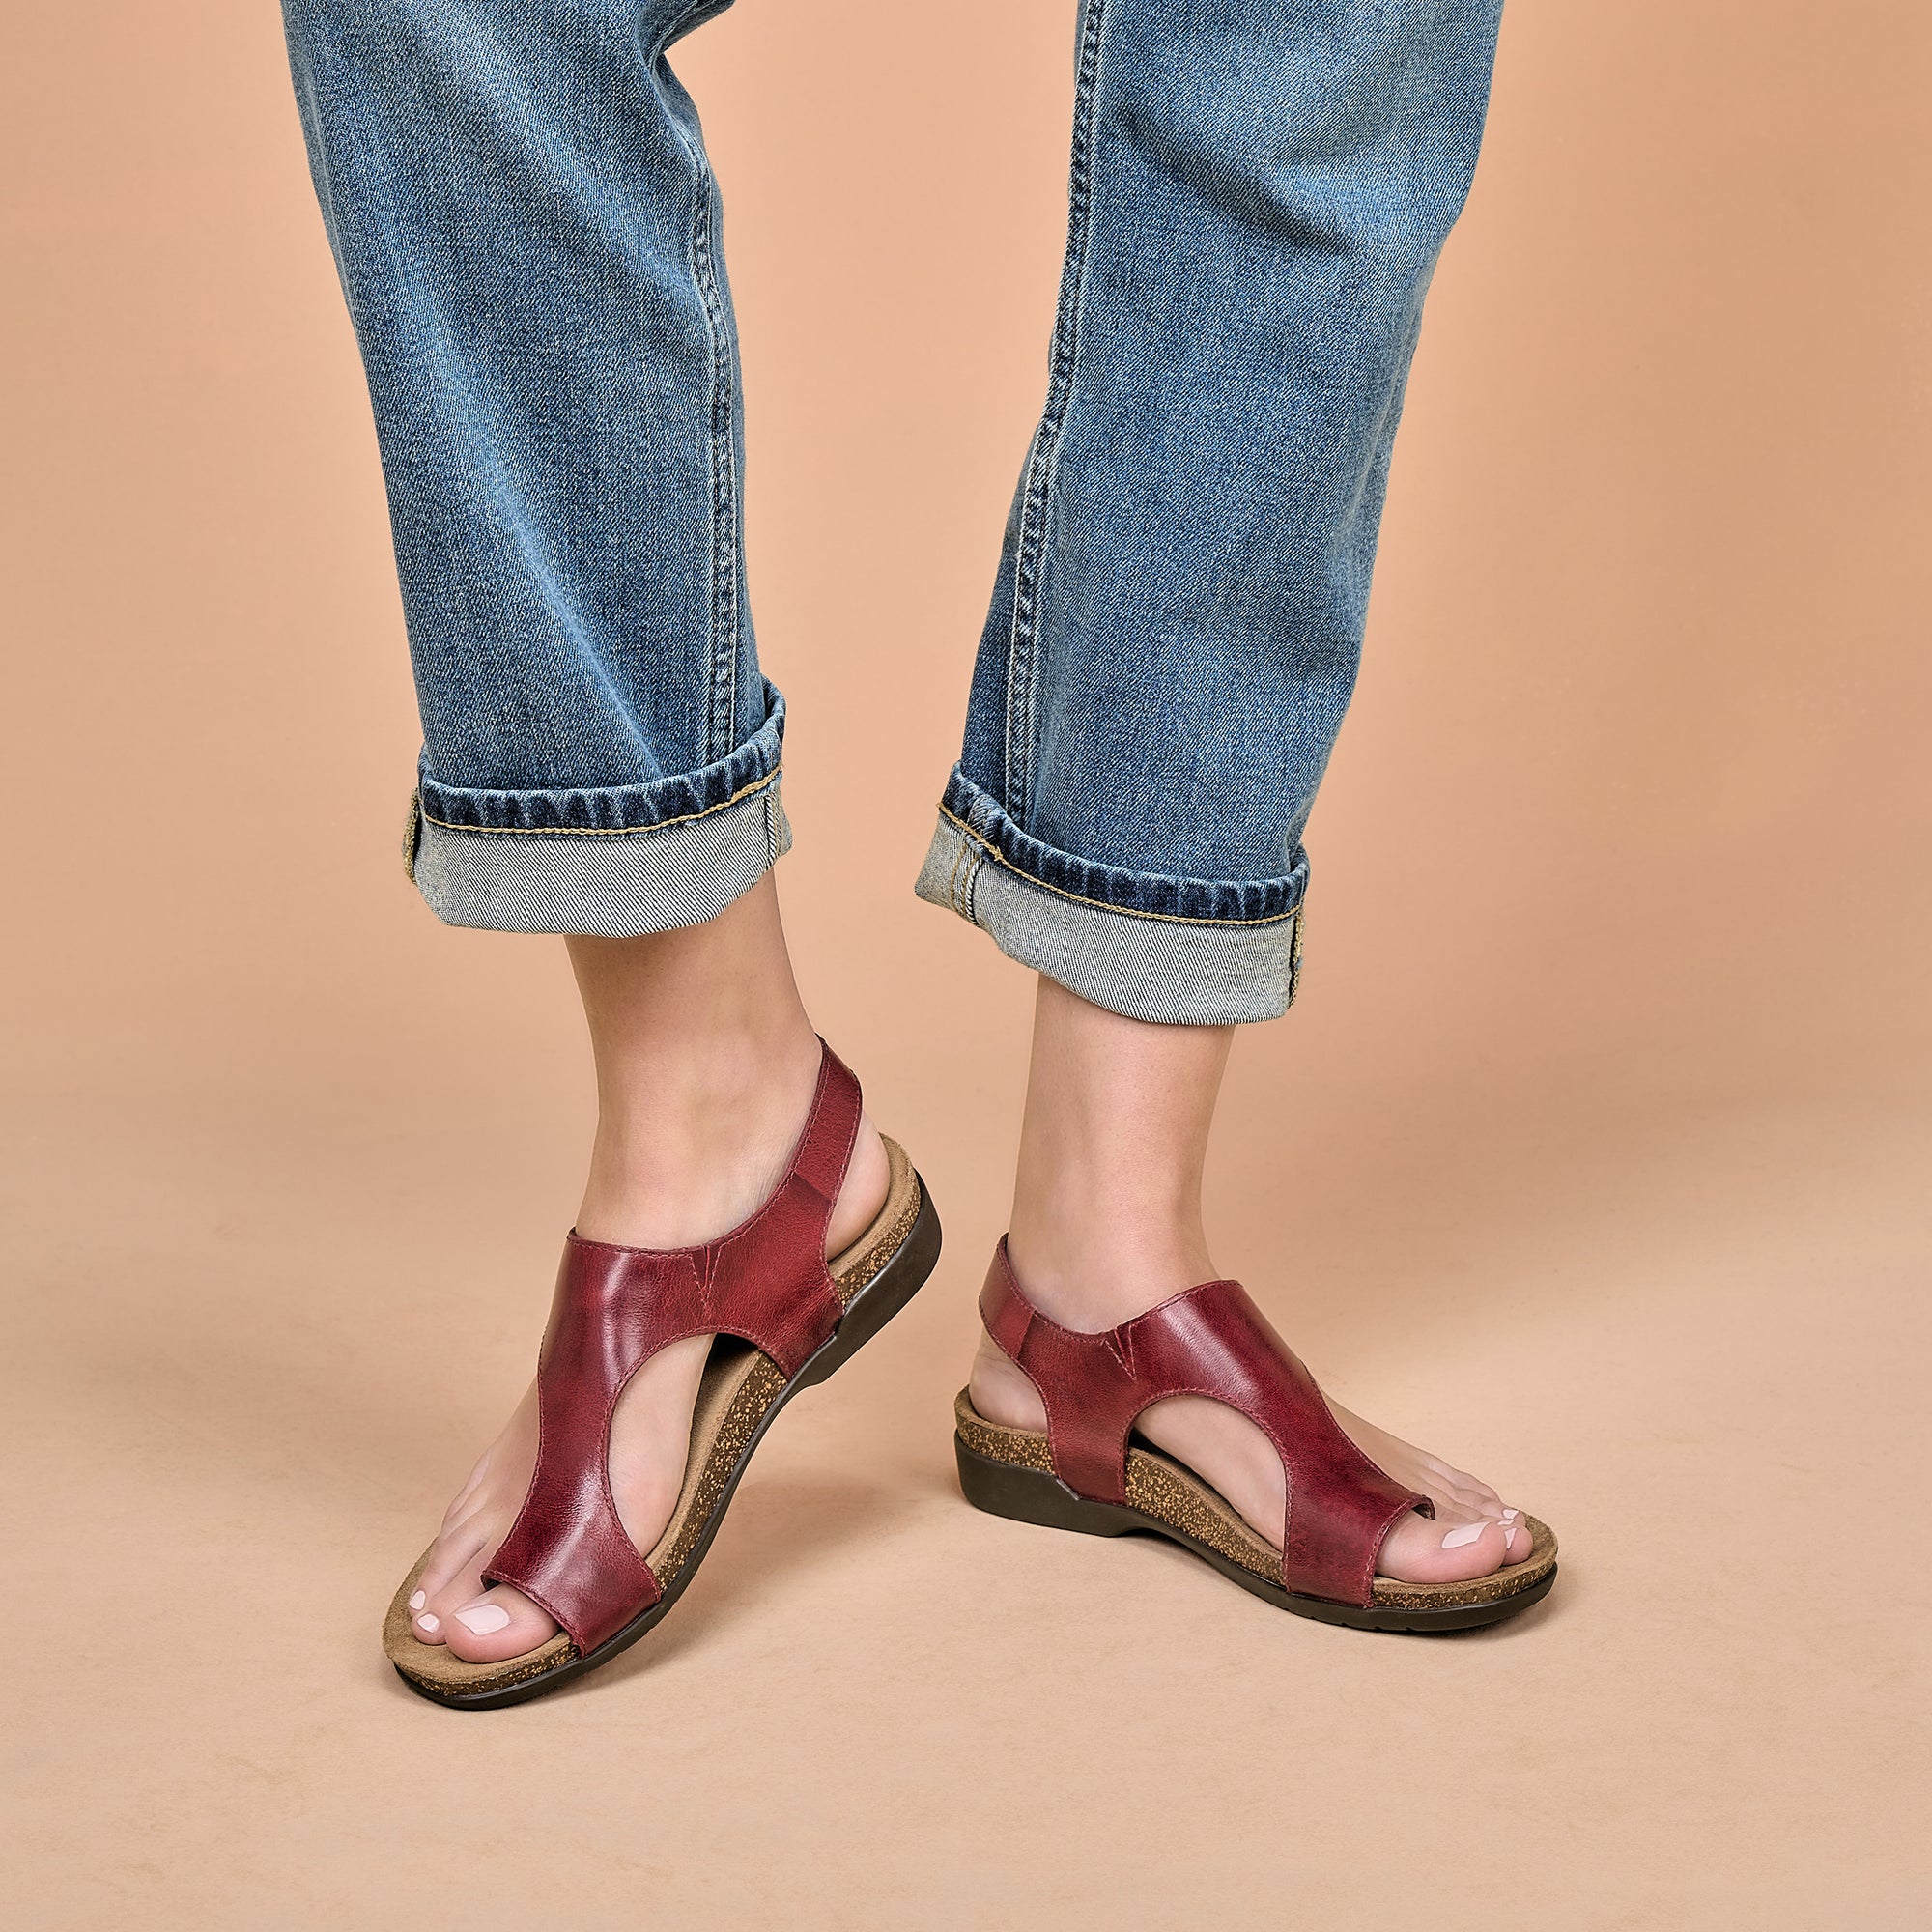 Red leather flat sandals with cork-based soles worn with jeans.